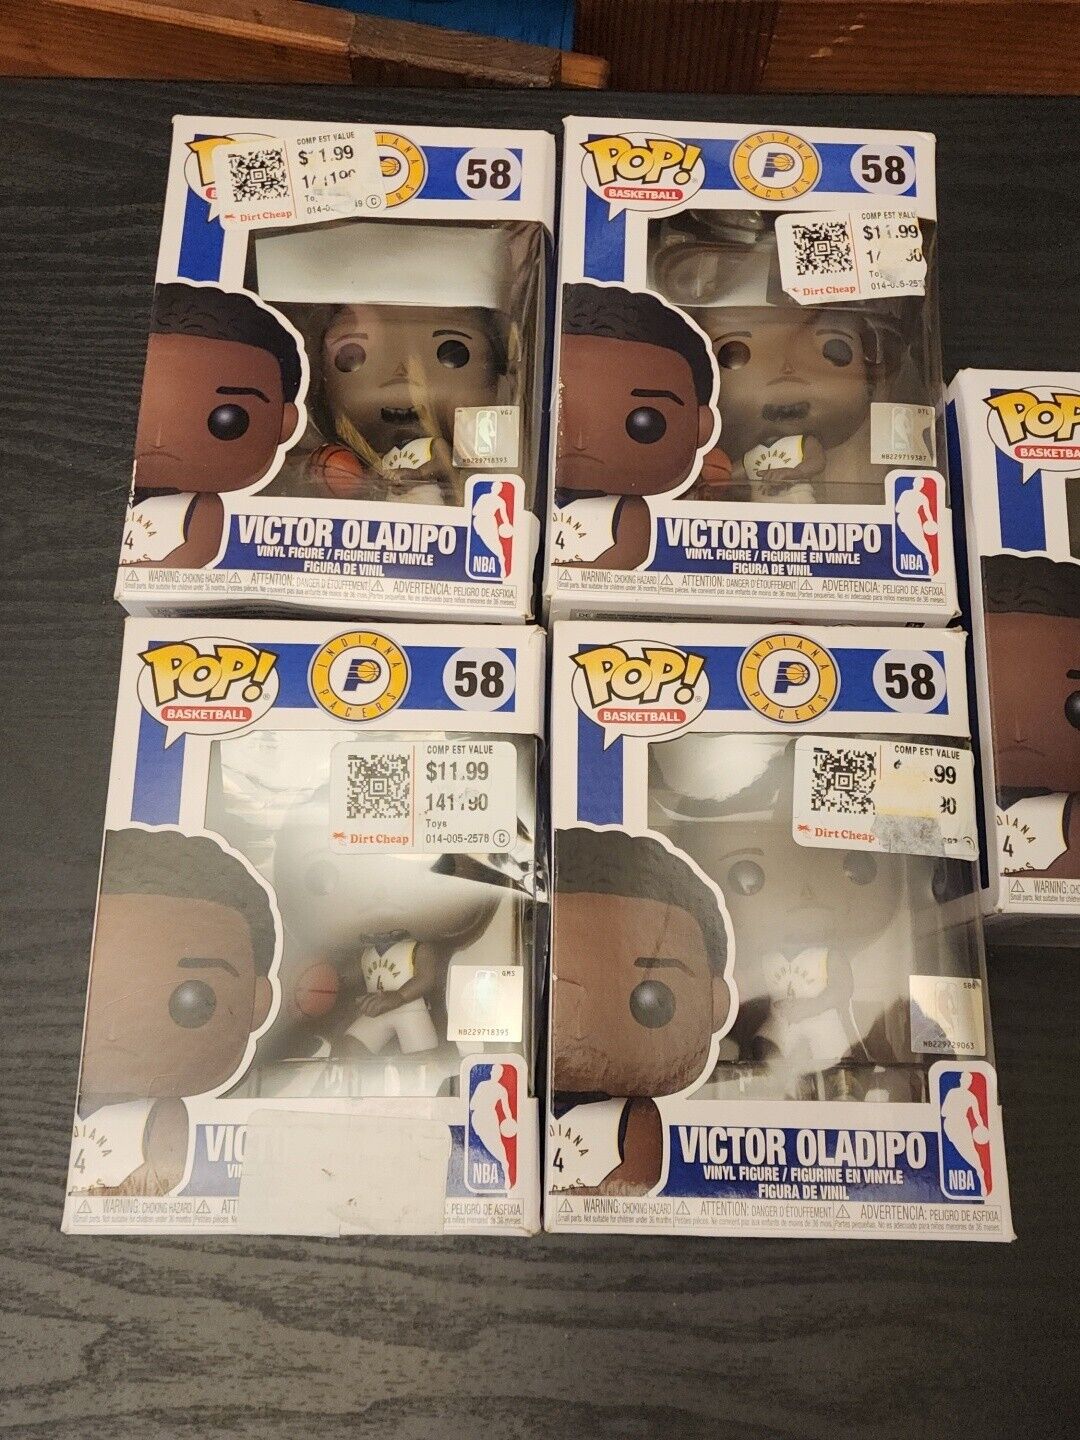 Lot of 5 Funko Pop Victor Oladipo Indiana Pacers NBA Vinyl Toy Figure #58